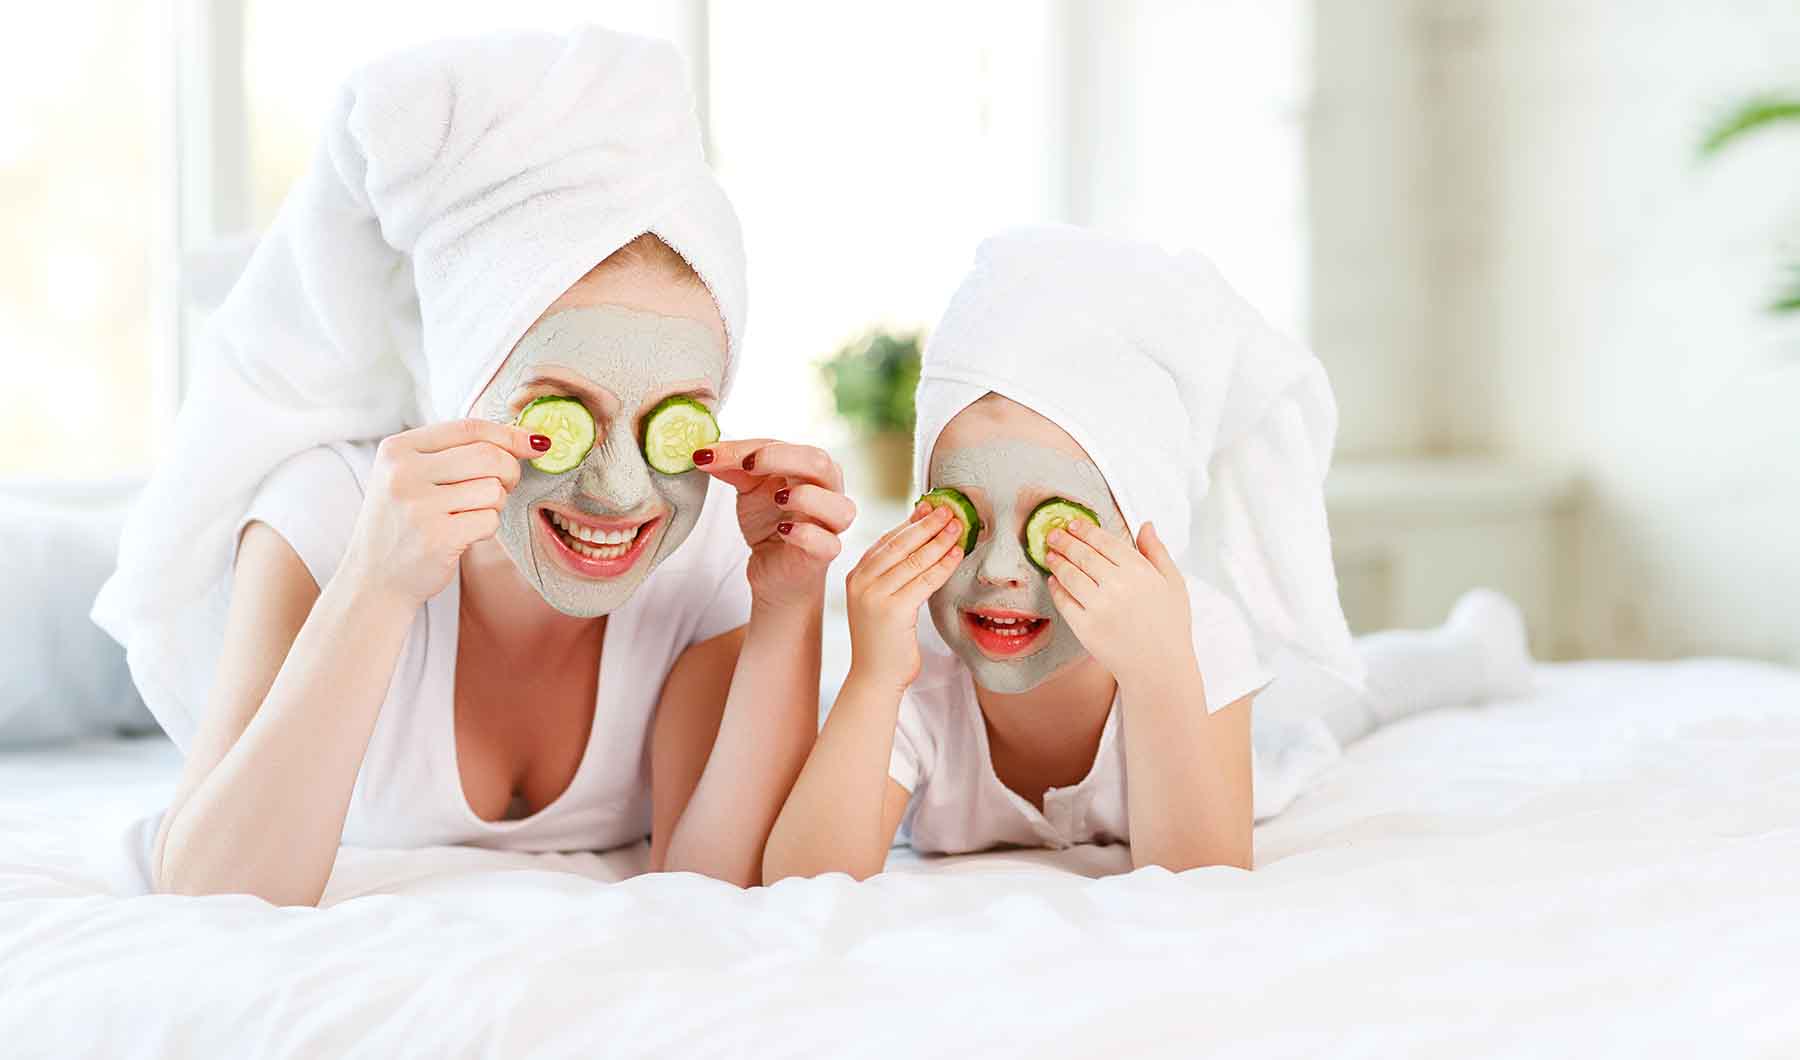 Mom and daughter at the spa